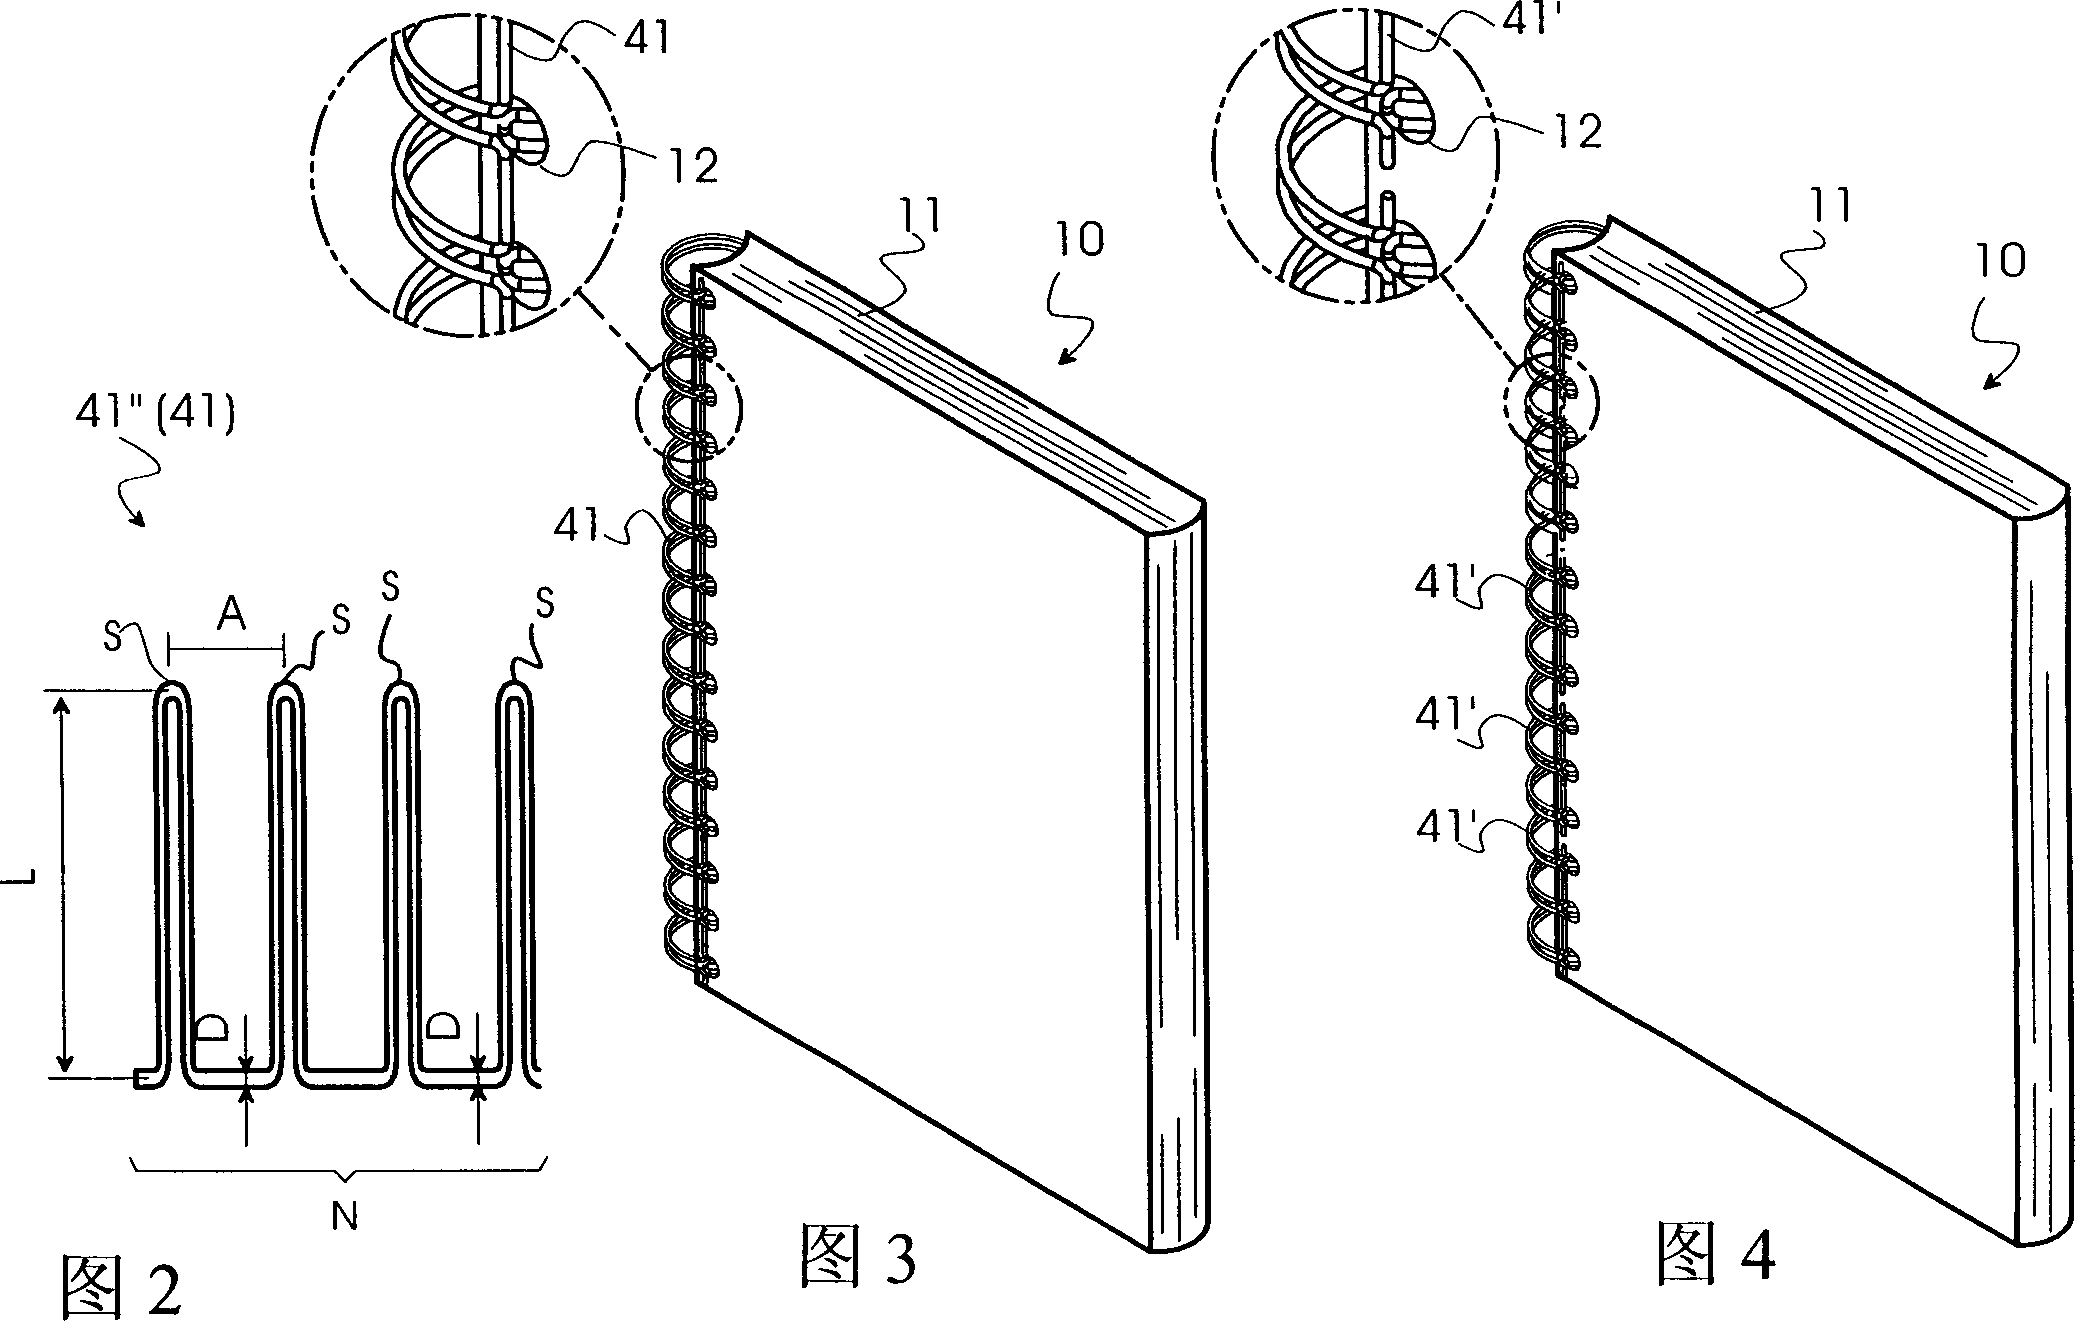 Apparatus for making metallic wire binding parts